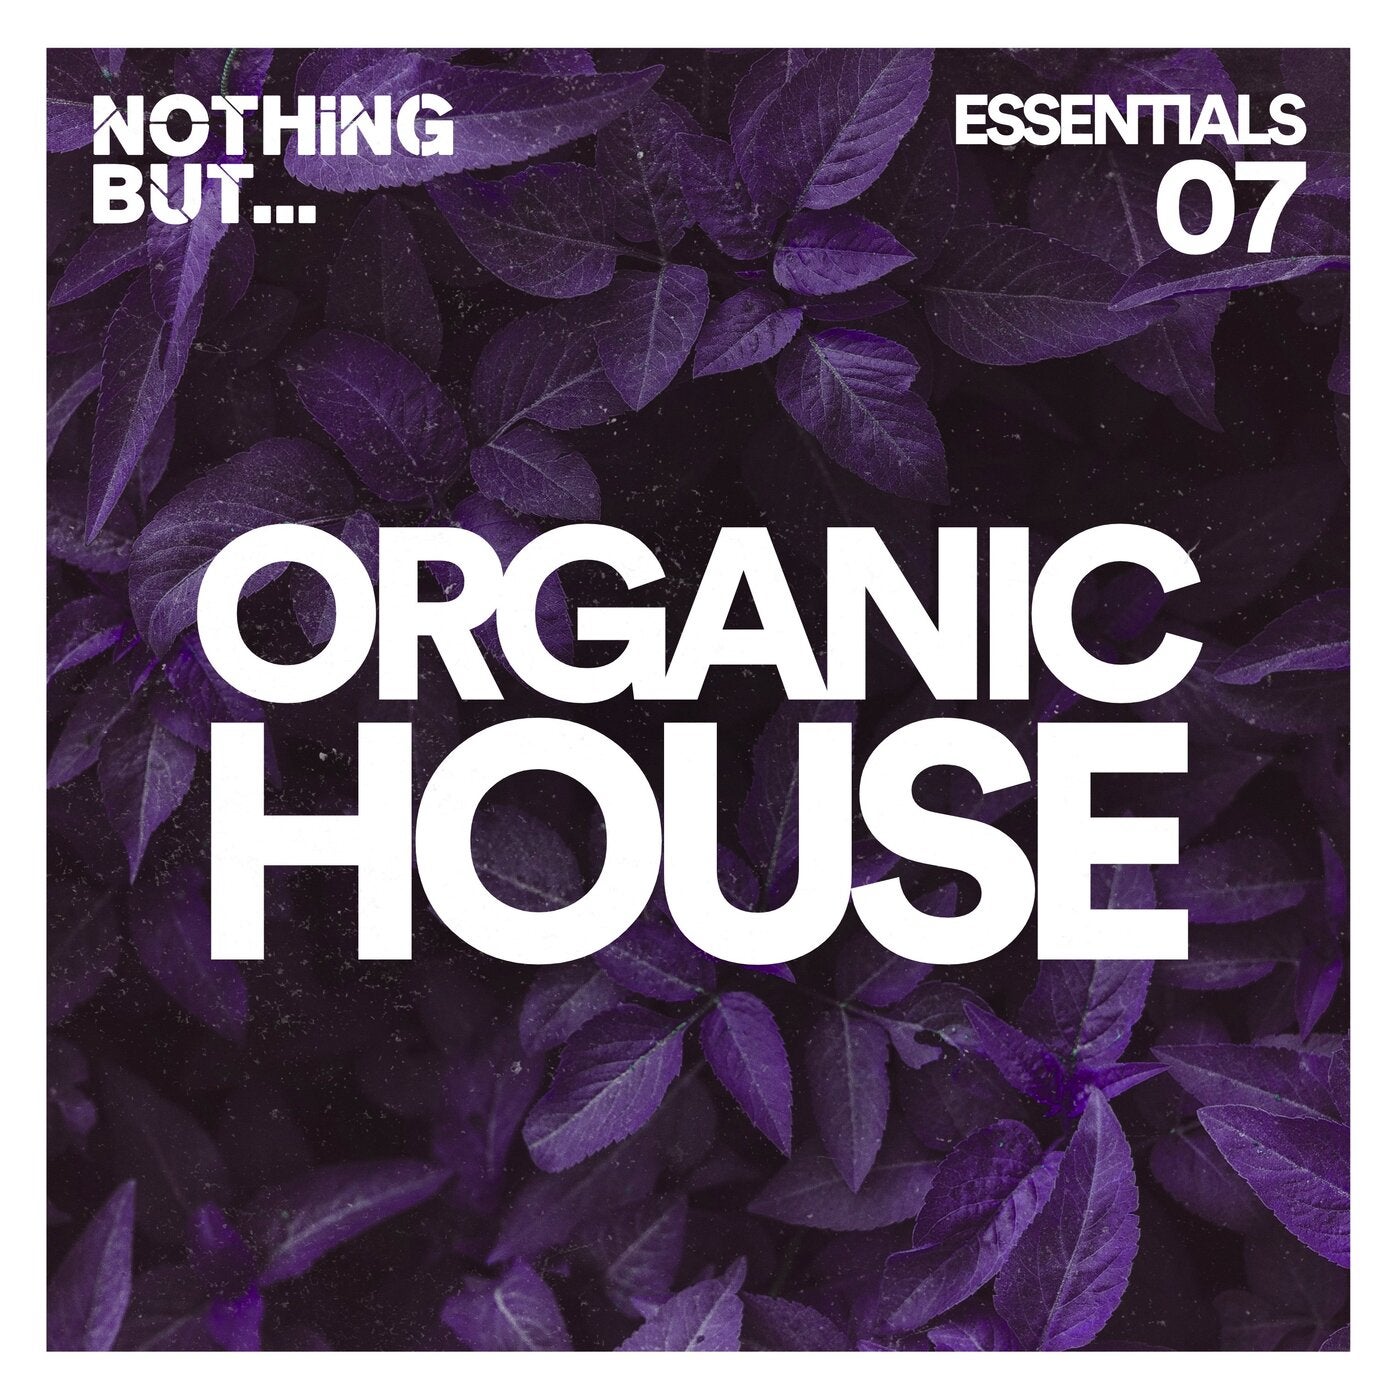 Nothing But... Organic House Essentials, Vol. 07